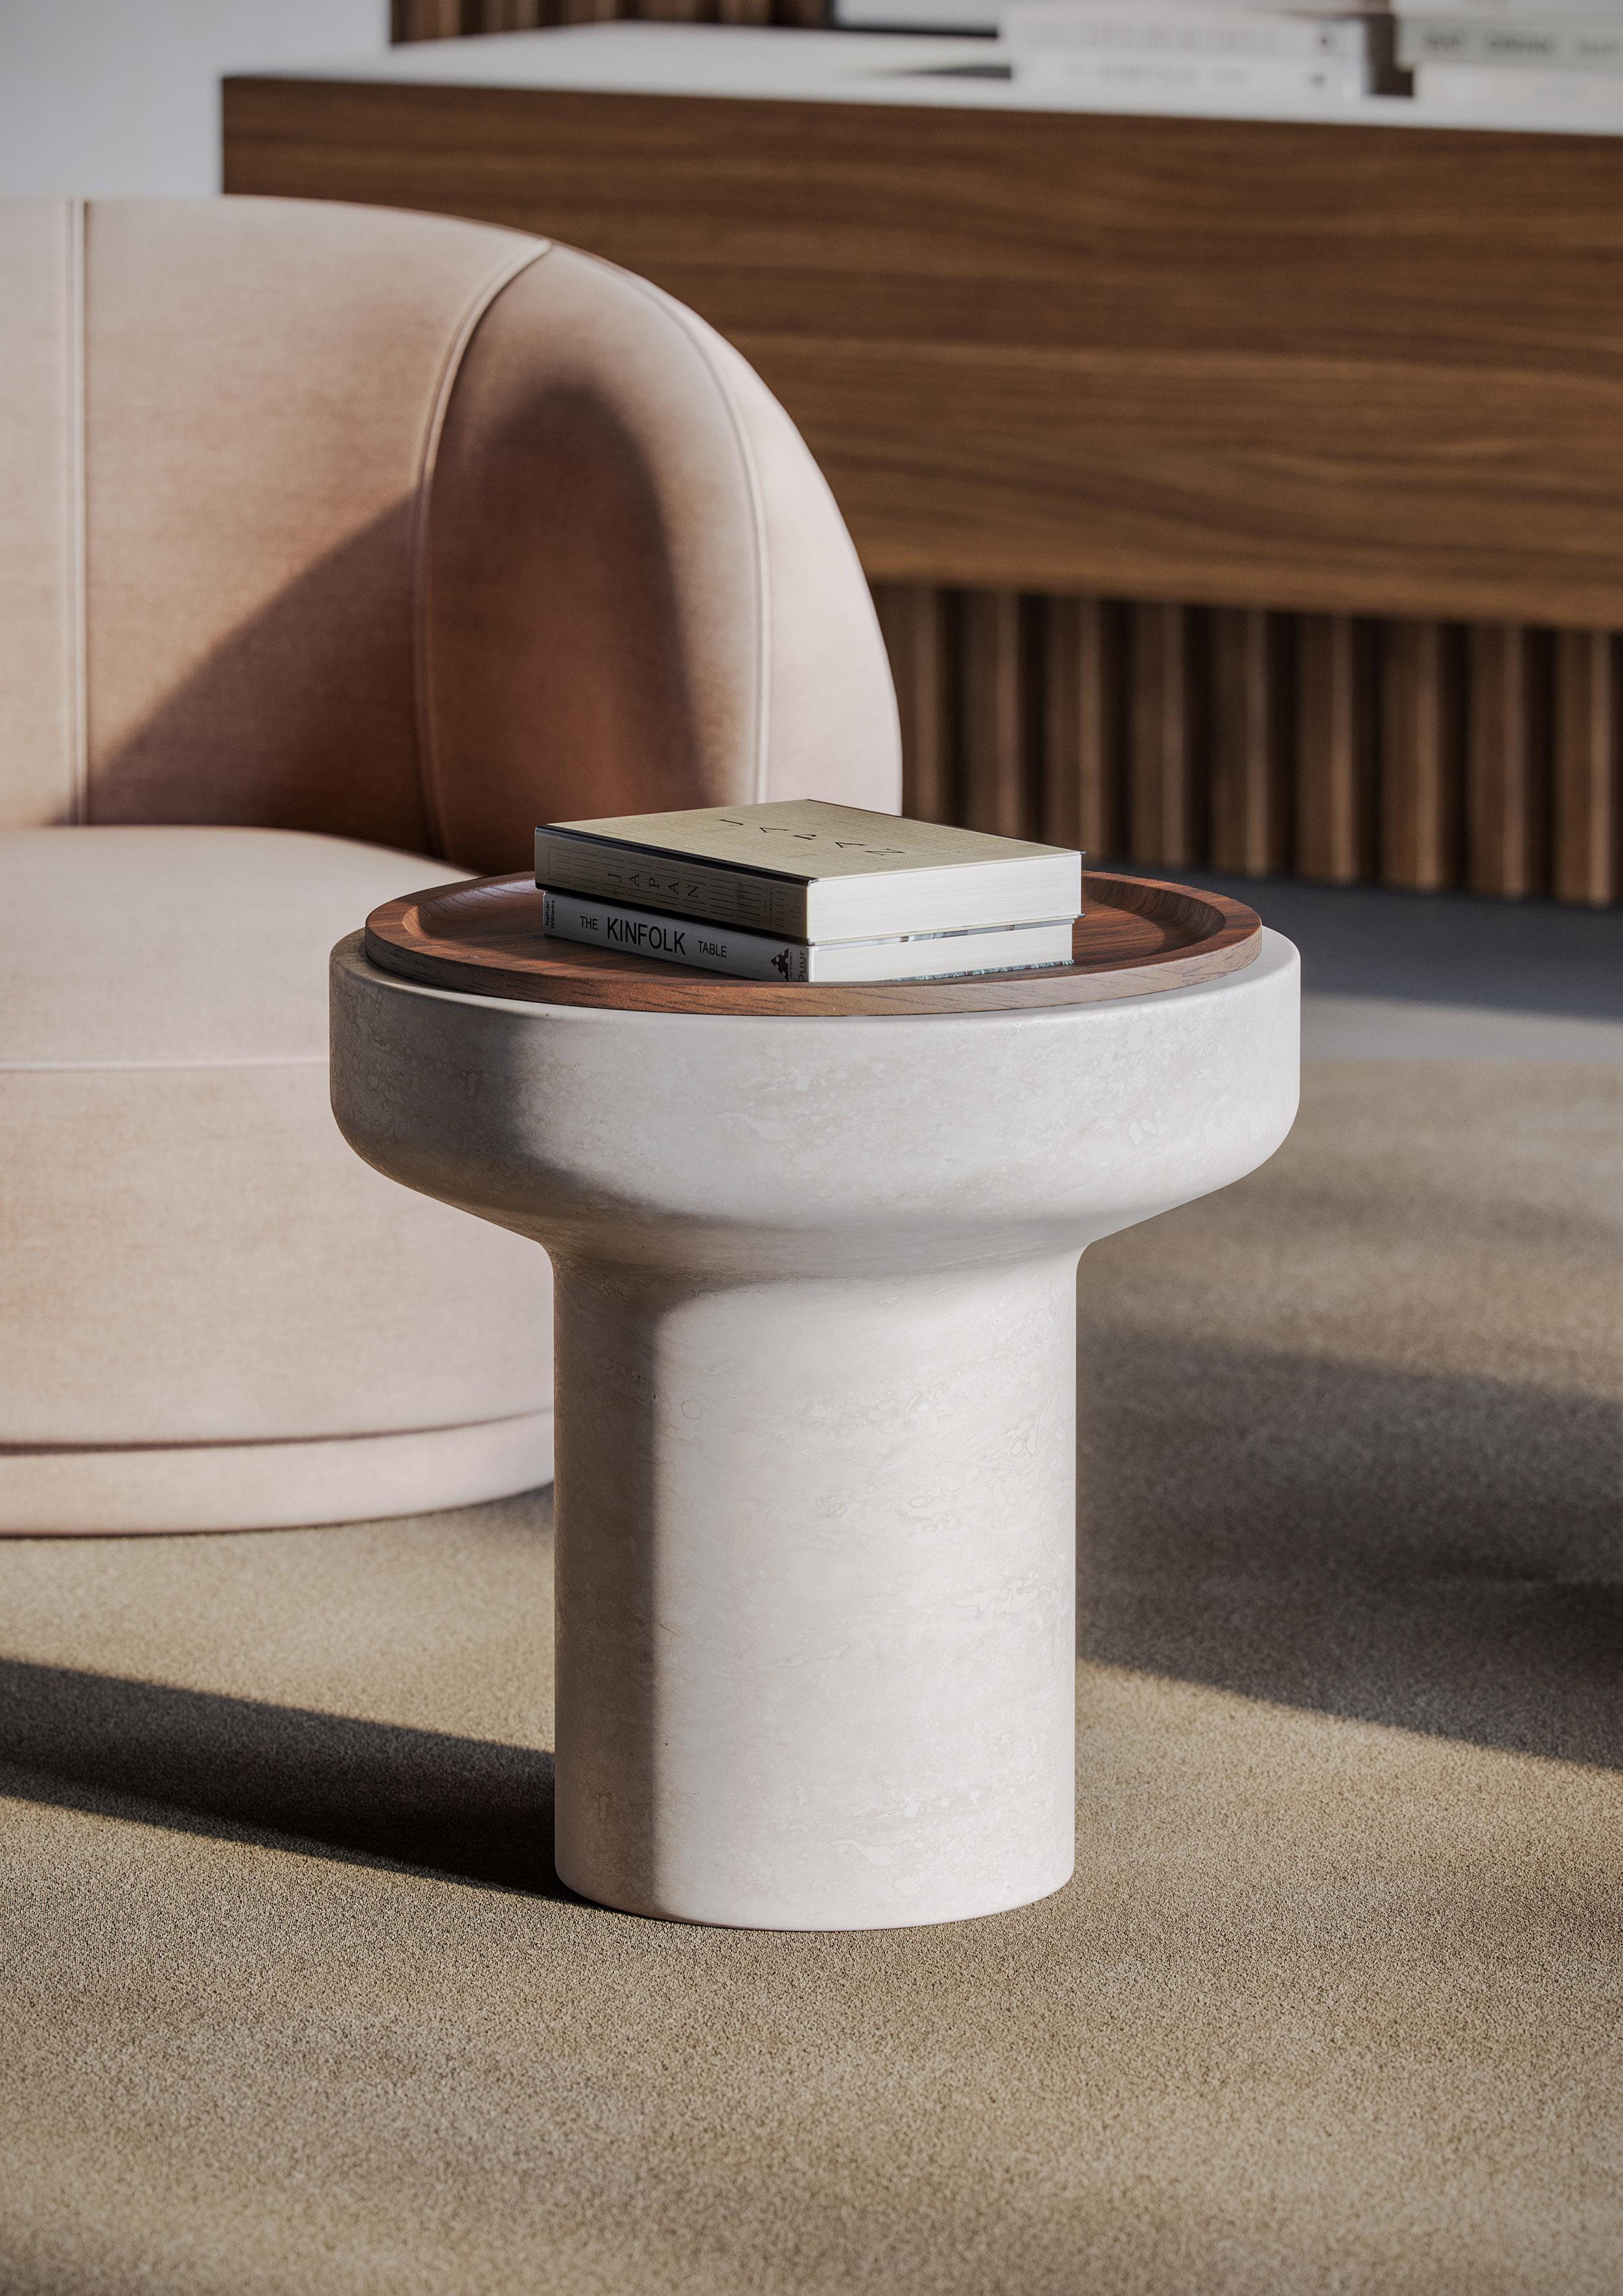 Side Table in Travertine Navona and walnut wood.
Size: 50×50 cm. - 19,6x19,6 in. smooth finishing. 
Commercial name: Tivoli Side Table in marble, Tivoli Collection by the Spanish designer Ivan Colominas. Made in Italy, hand finished.

Tivoli, a